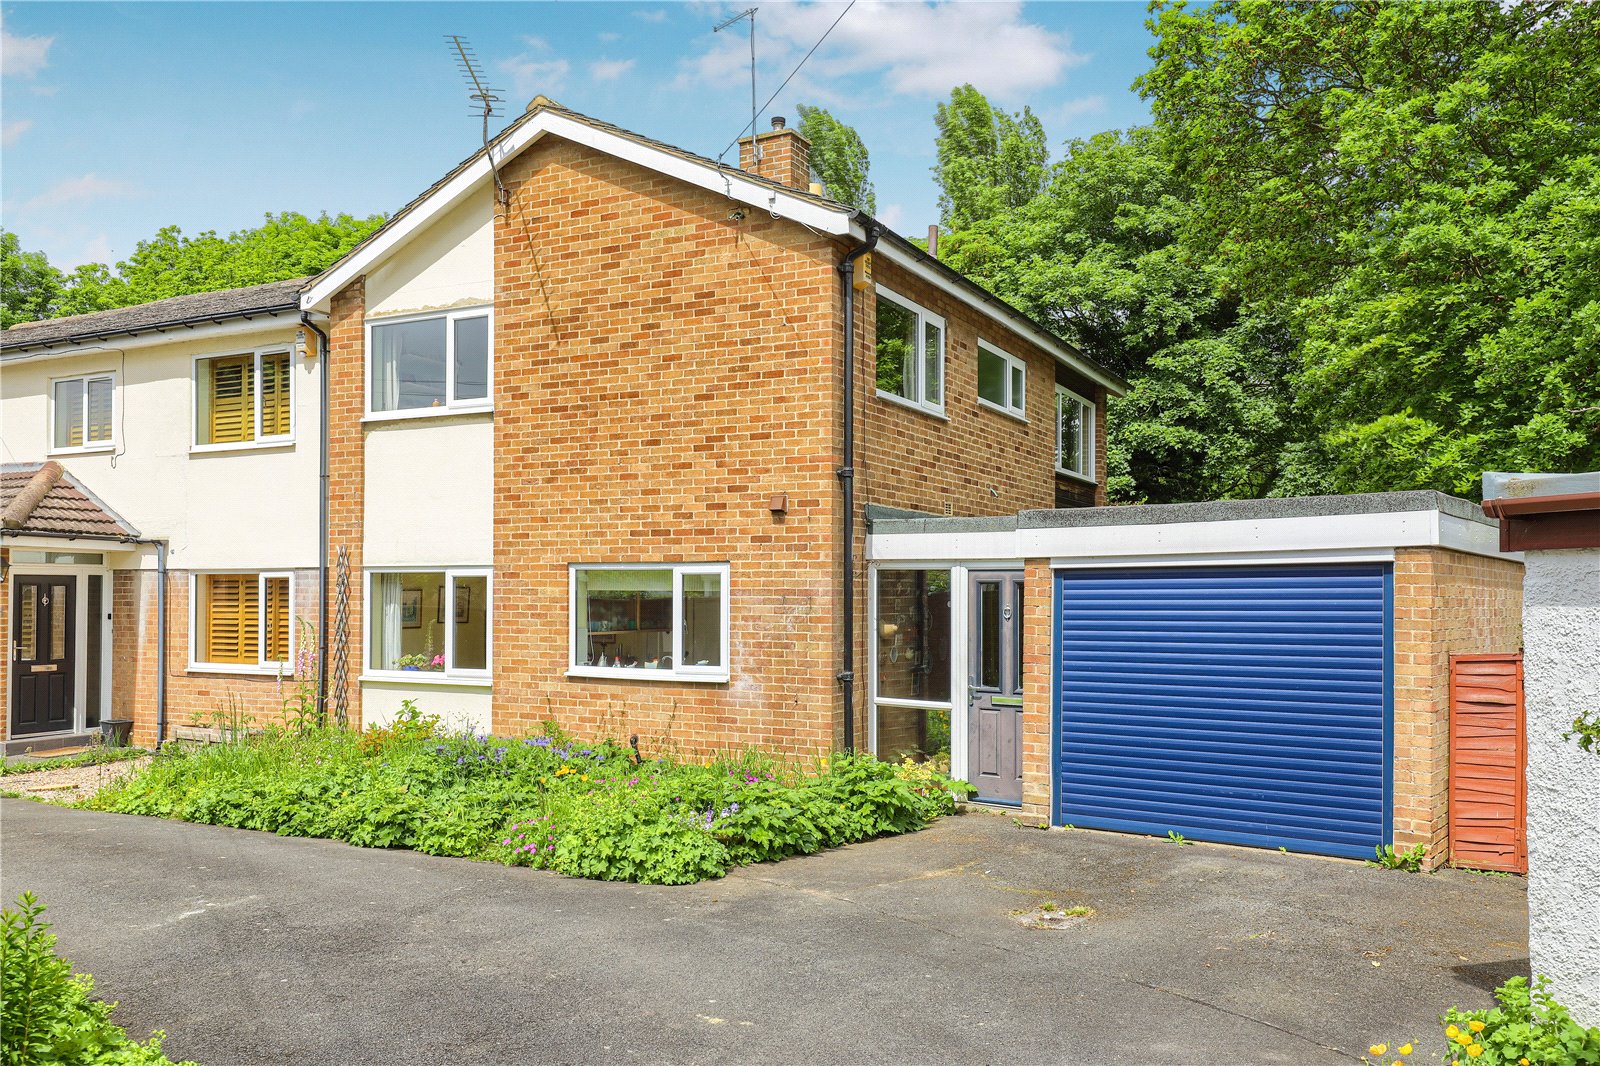 3 bed house for sale in Rookwood Road, Nunthorpe 1